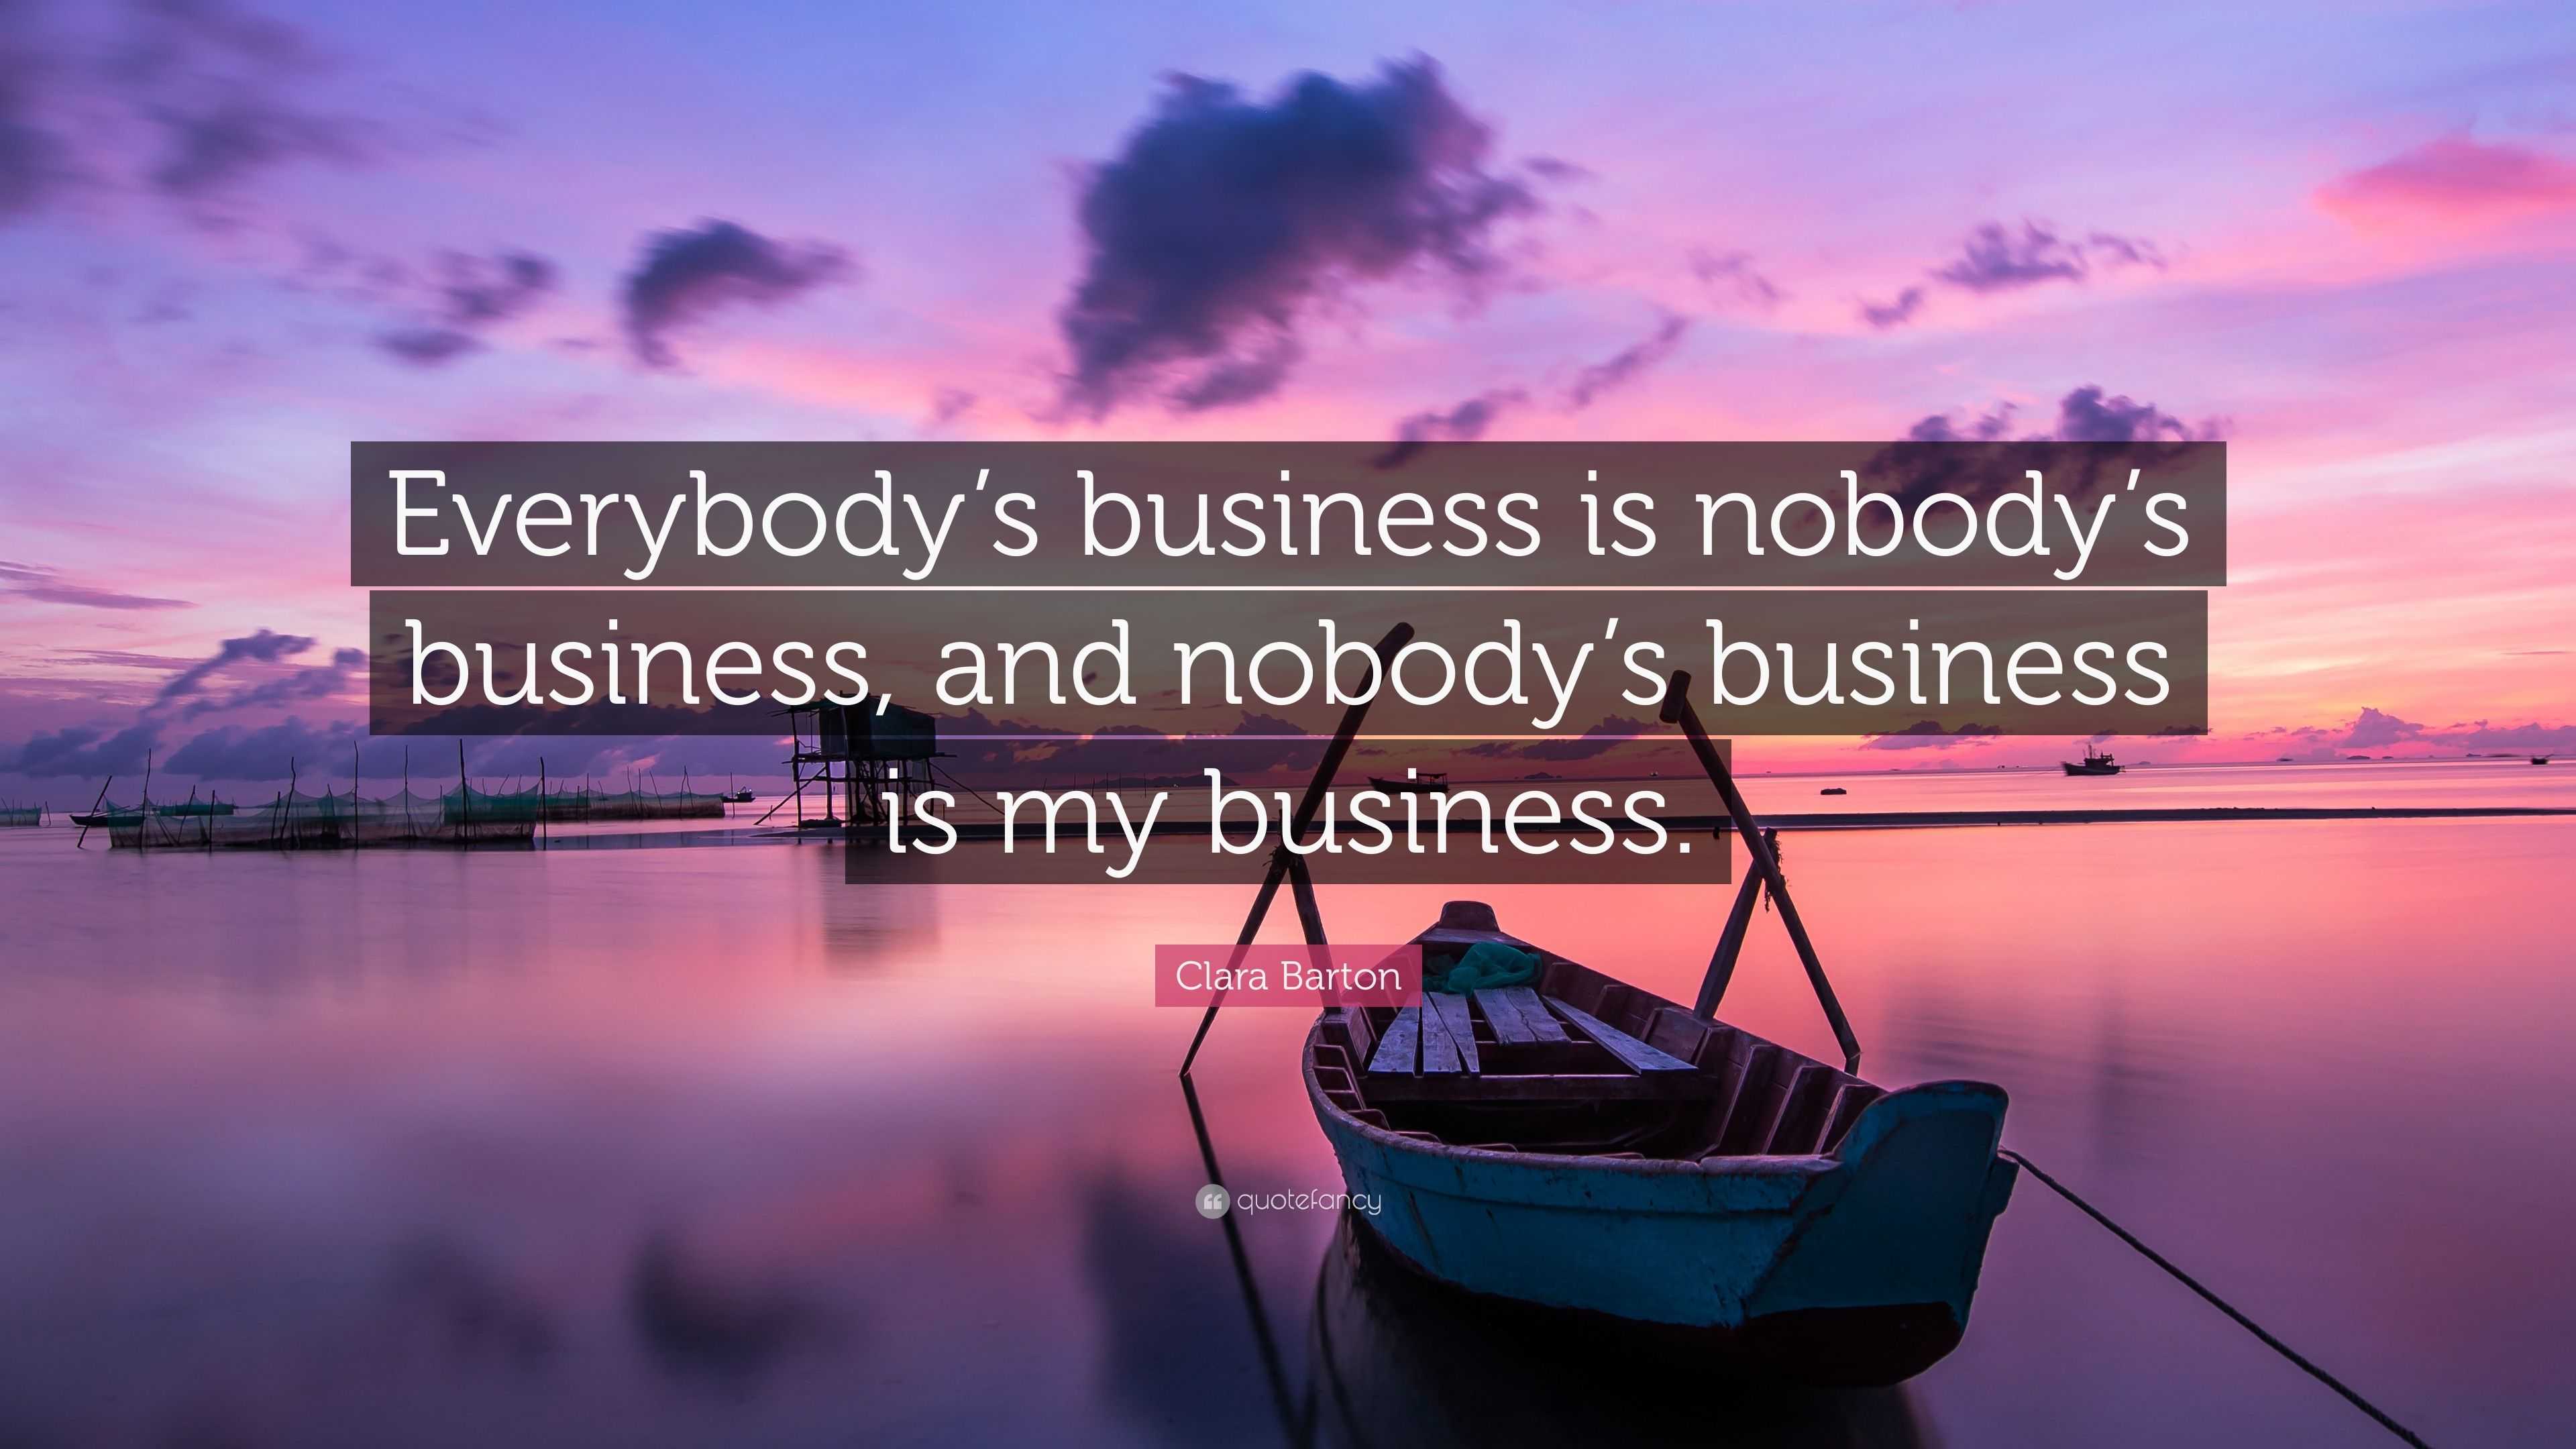 Clara Barton Quote: “Everybody's business is nobody's business 